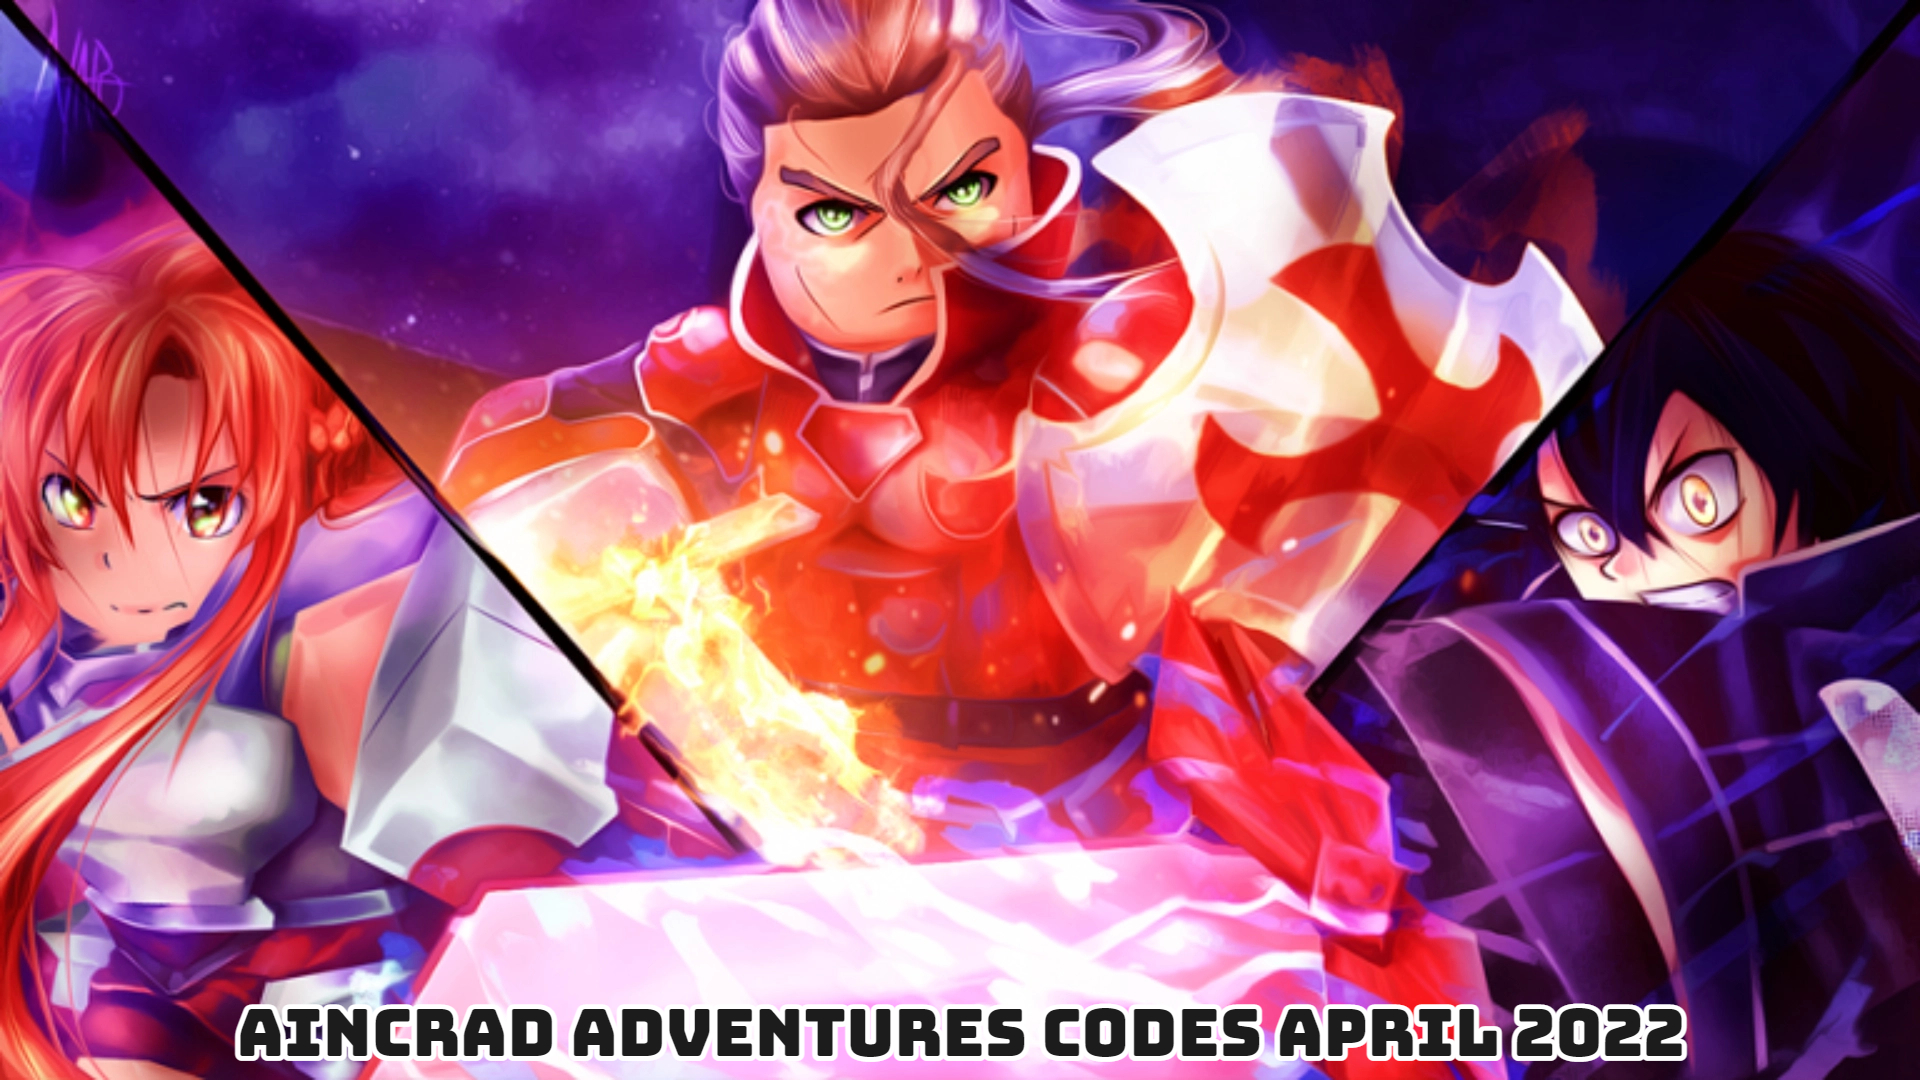 You are currently viewing Aincrad Adventures Codes Today 12 April 2022